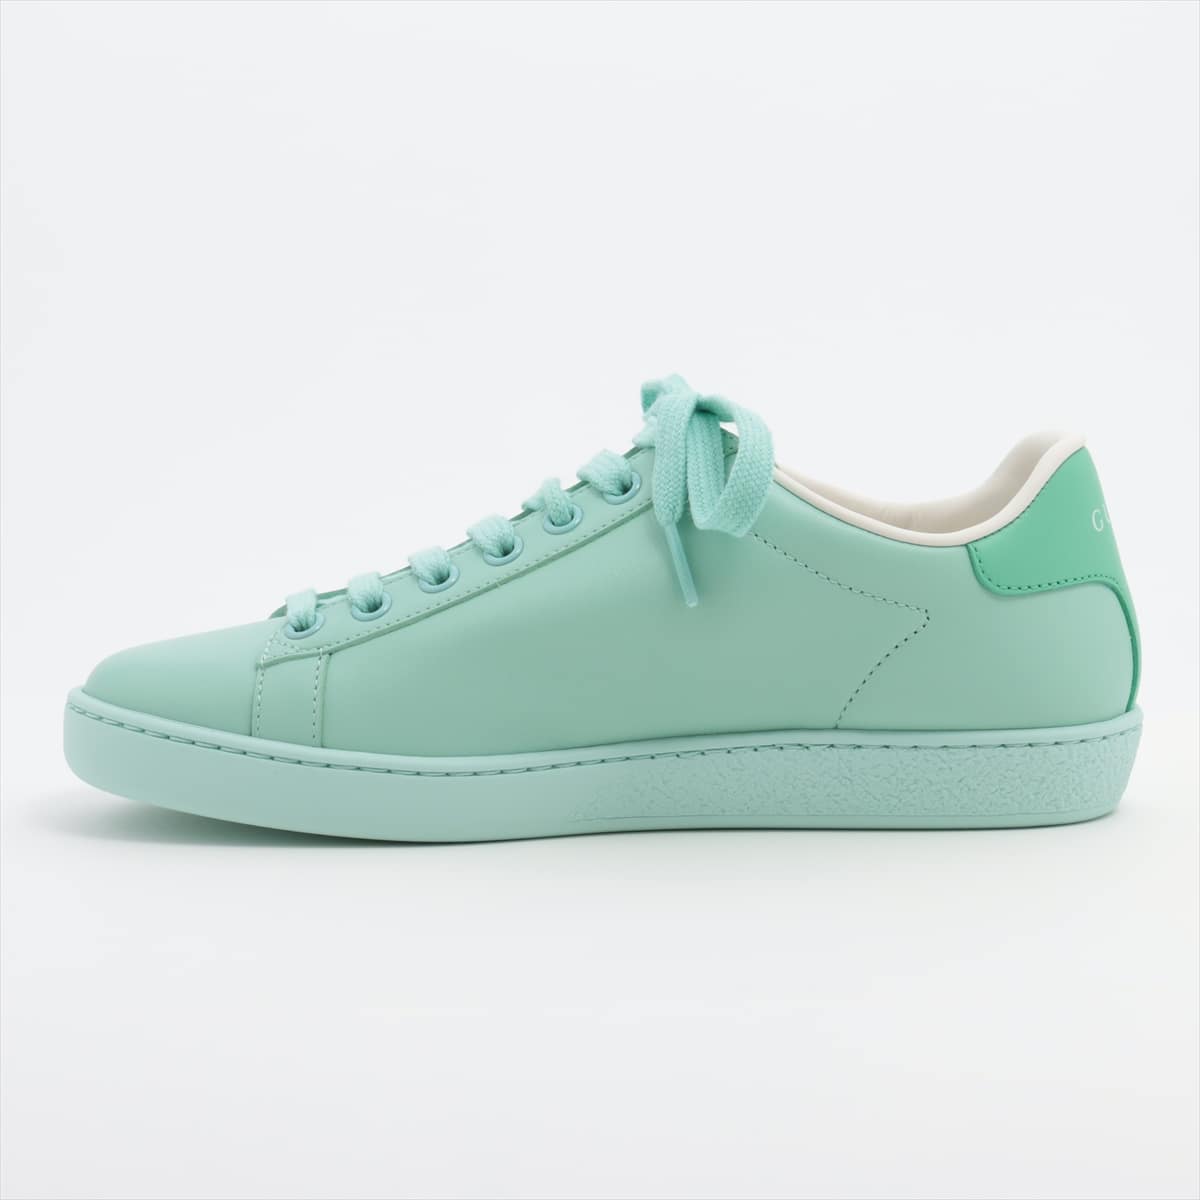 Gucci Interlocking G Leather Sneakers 35 Ladies' Green 598527 There is a box